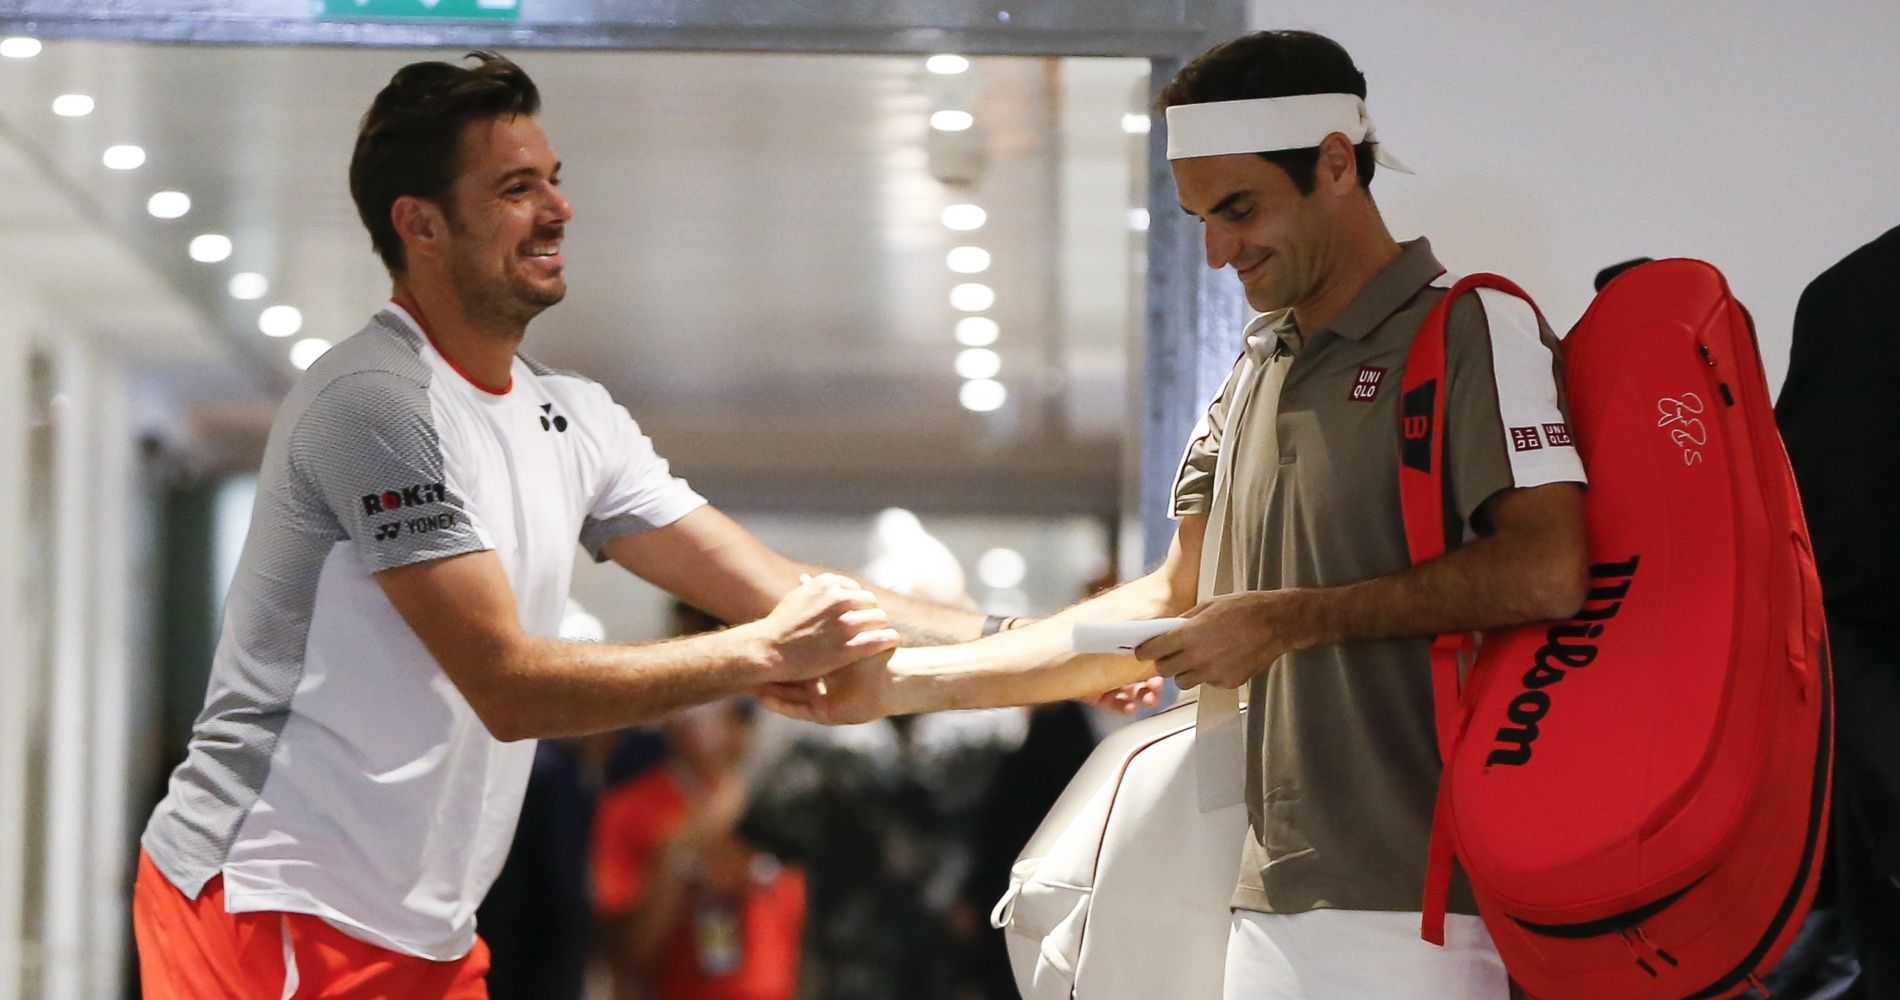 Stan Wawrinka and Roger Federer before their quarter-final encounter during the 2019 French Open